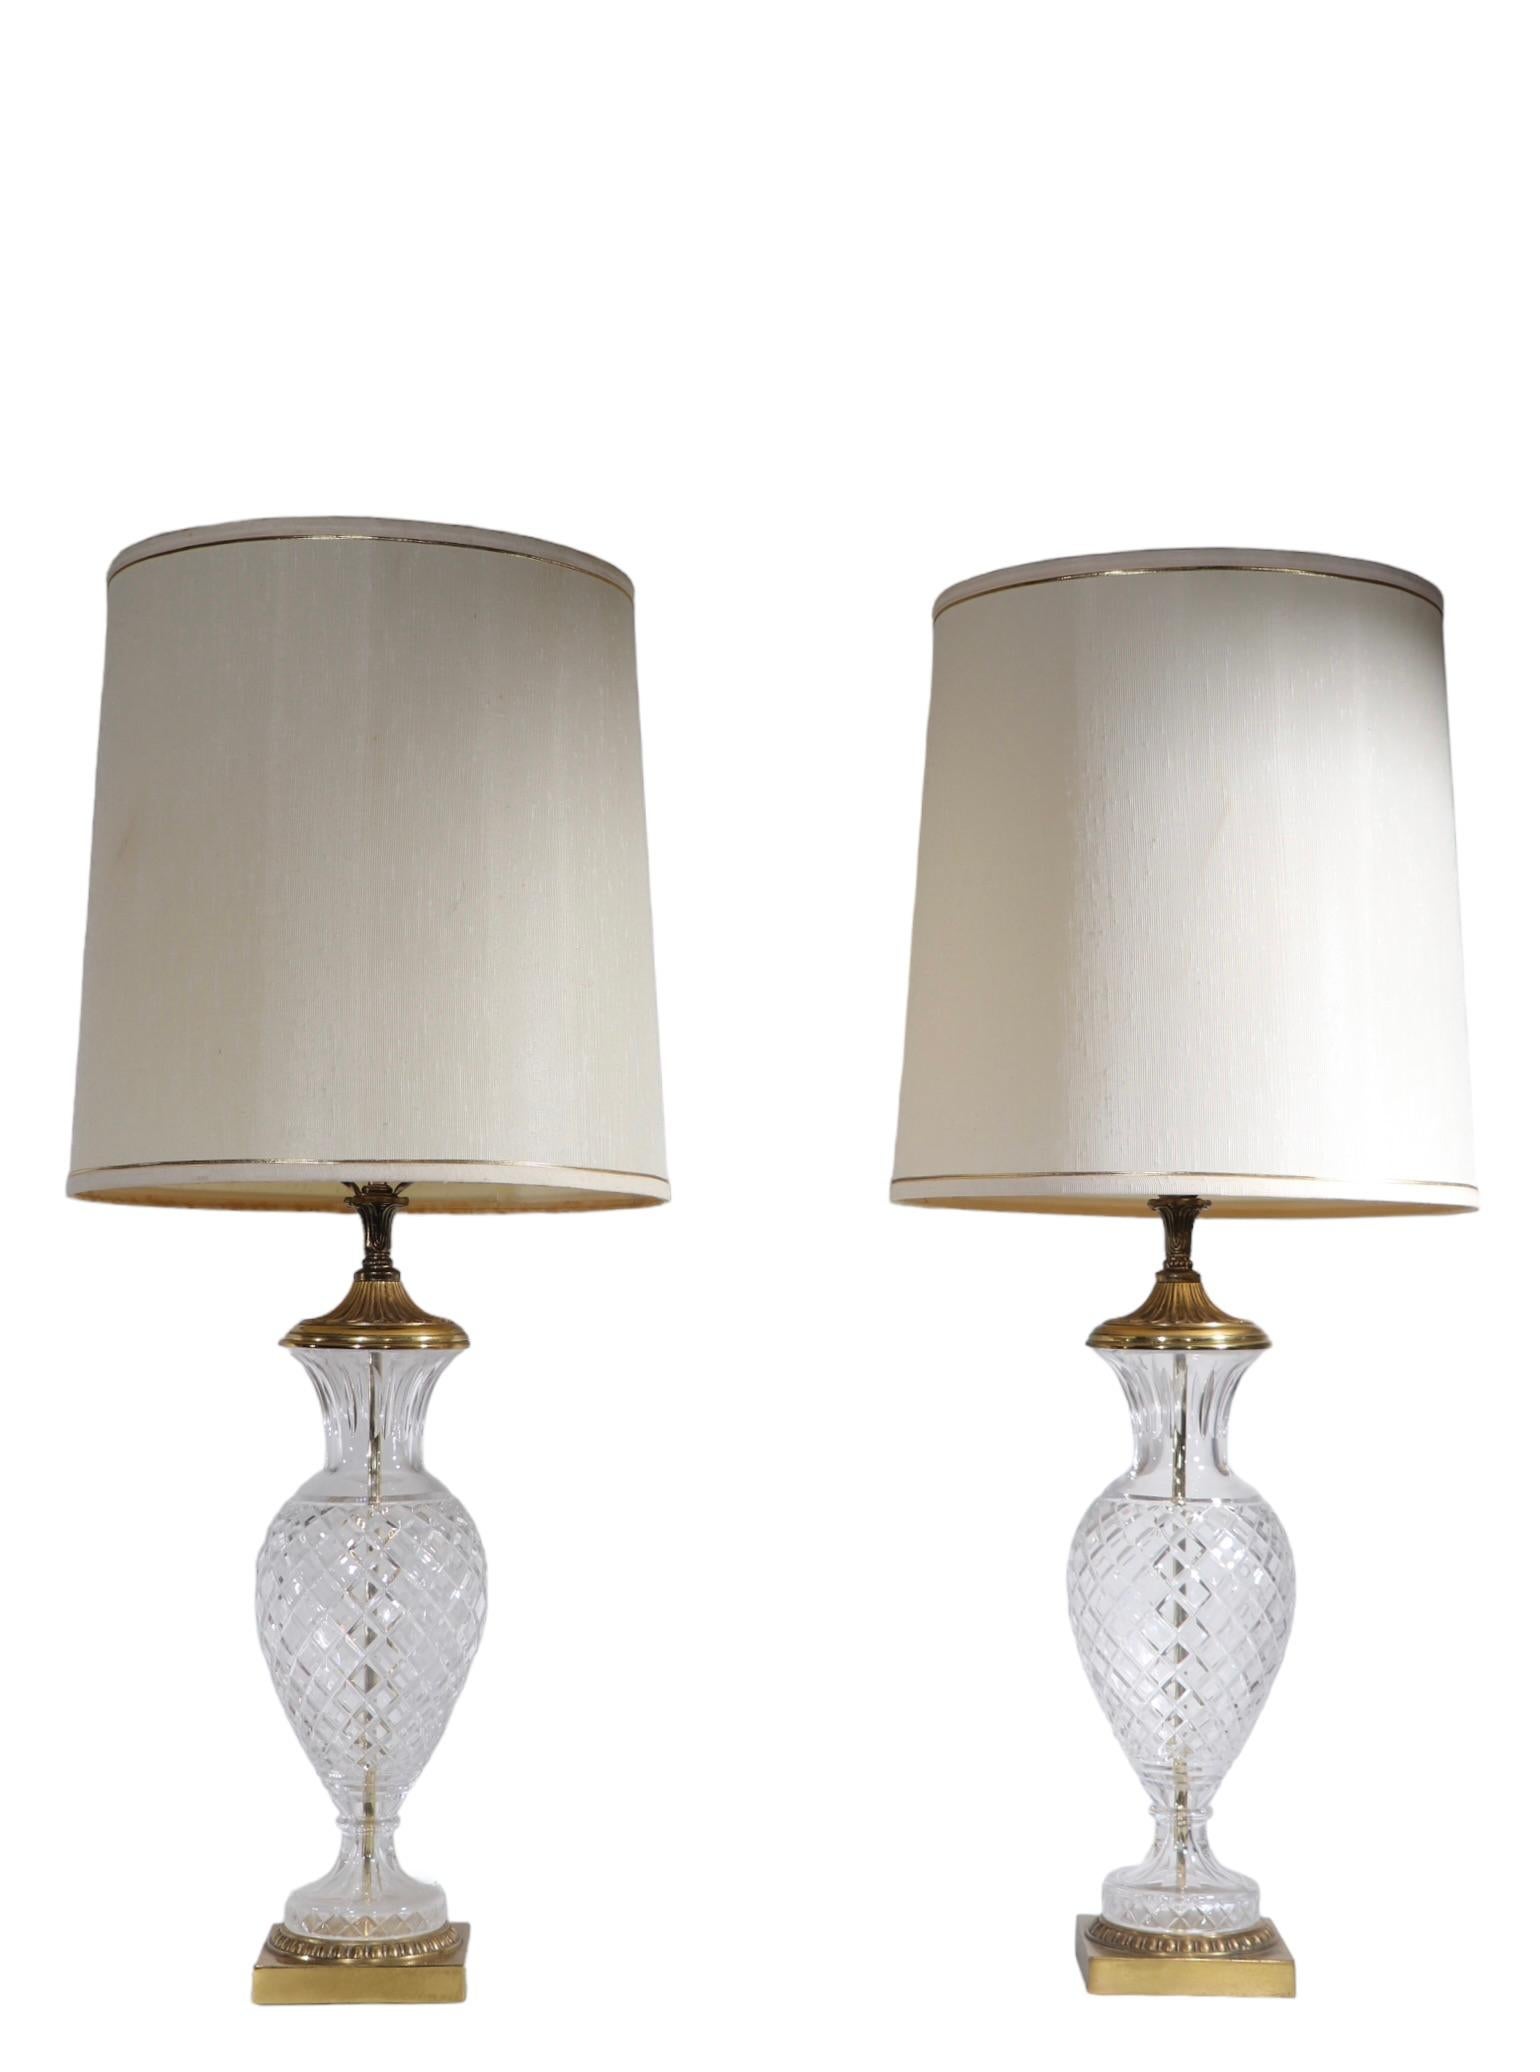 Pair of   Formal Classical Revival Style Glass and Brass  Lamps c 1940/1960's For Sale 7